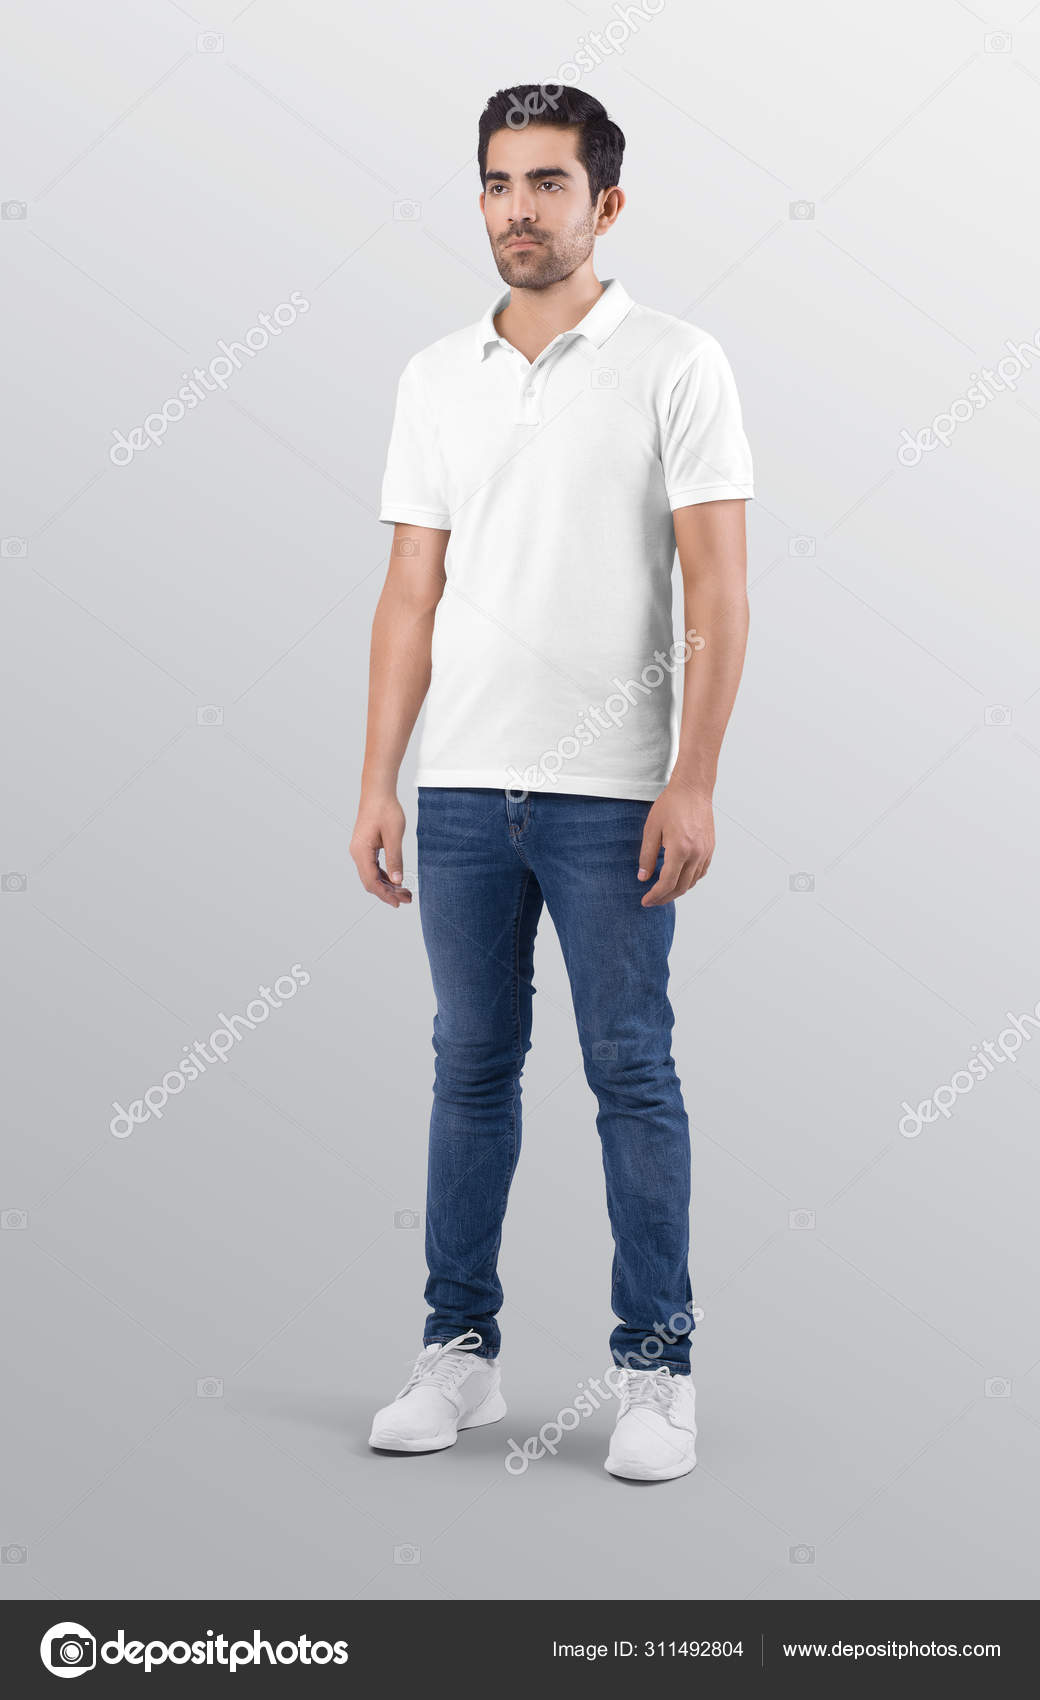 white polo shirt and blue jeans